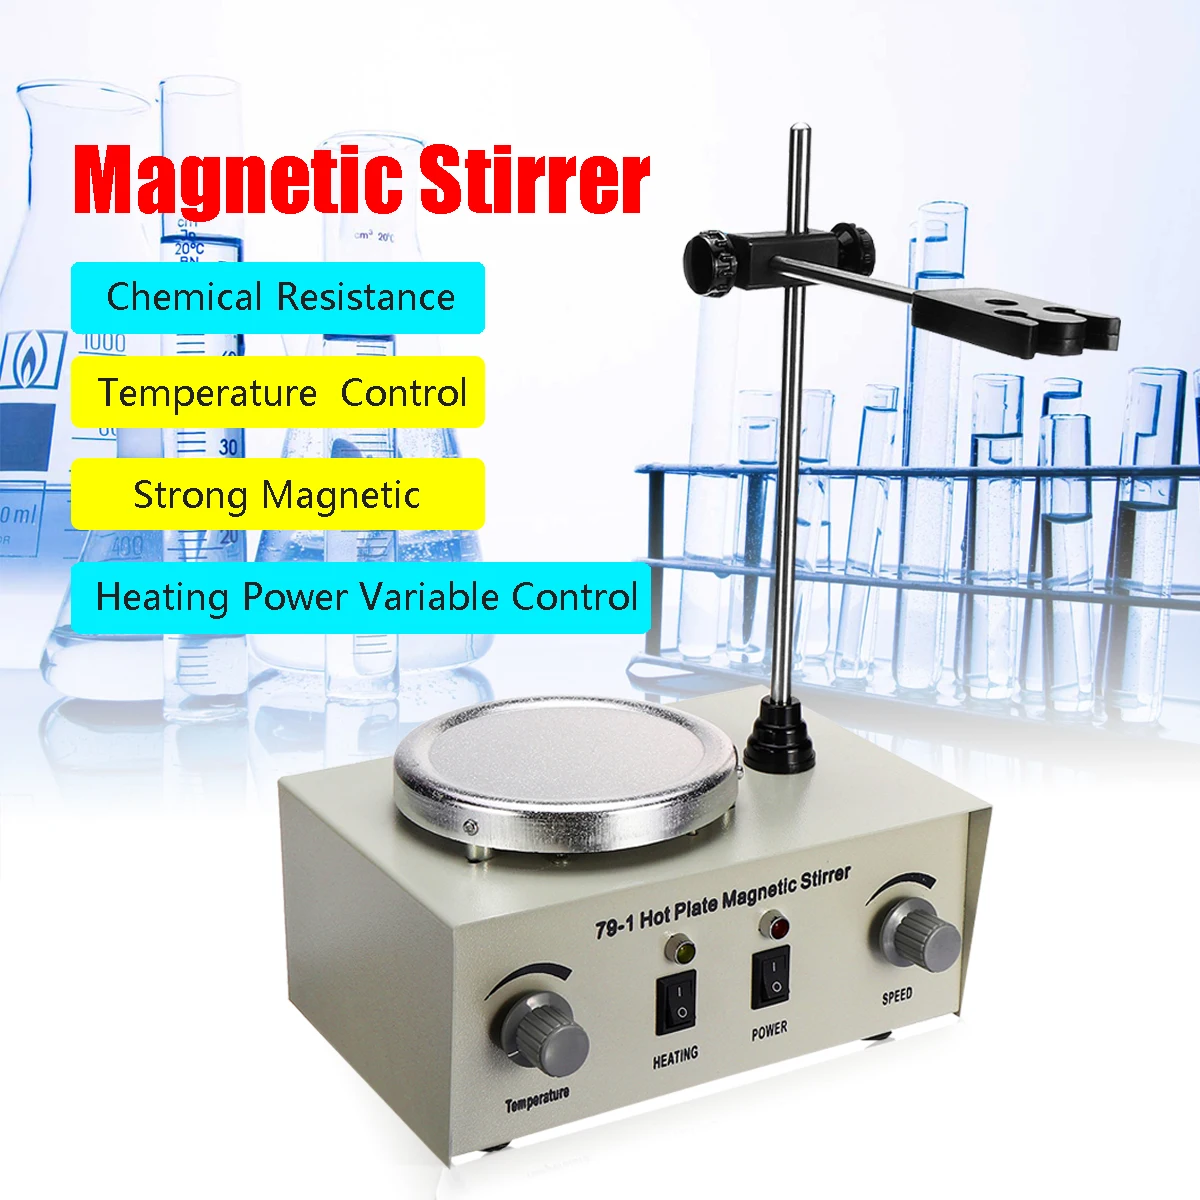 1# 1L Digital Magnetic Stirrer Mixer Machine Magnetic Stirrer Portable Hot Plate Magnetic Stirrer Mixer with Heated Function,0-3000 RPM for Scientific Research Clinics Classrooms Laboratory 